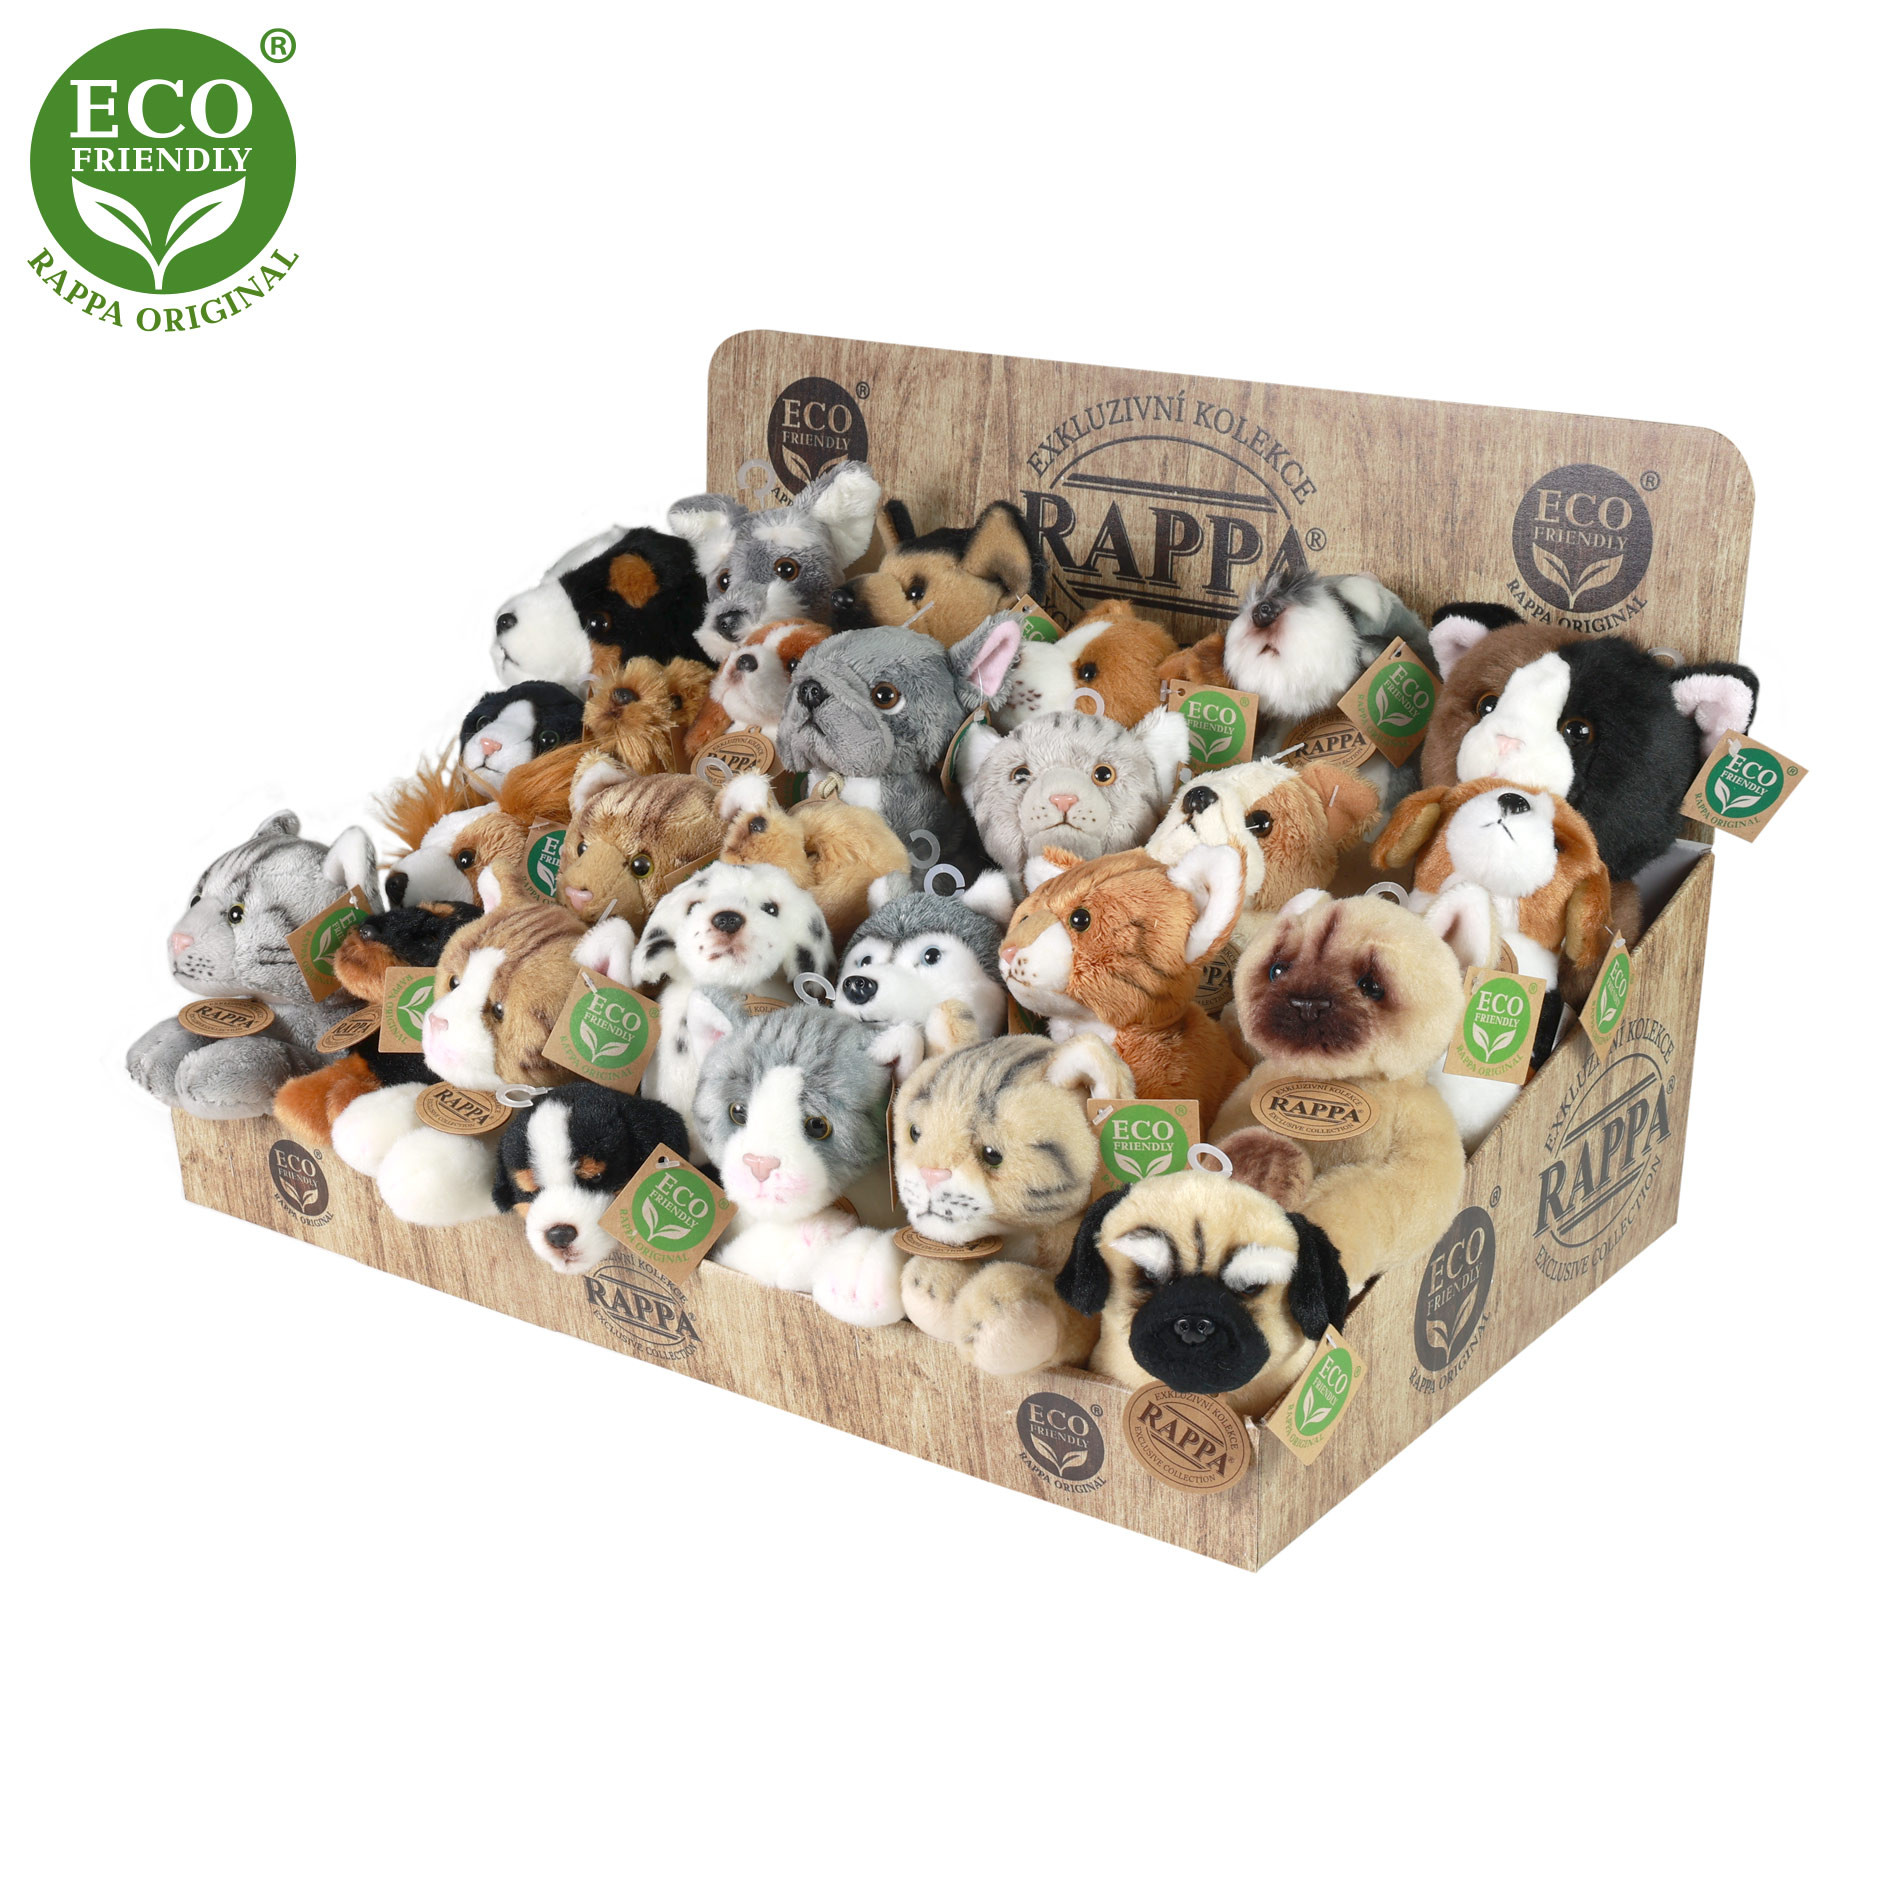 Plush dogs and cats display ECO-FRIENDLY